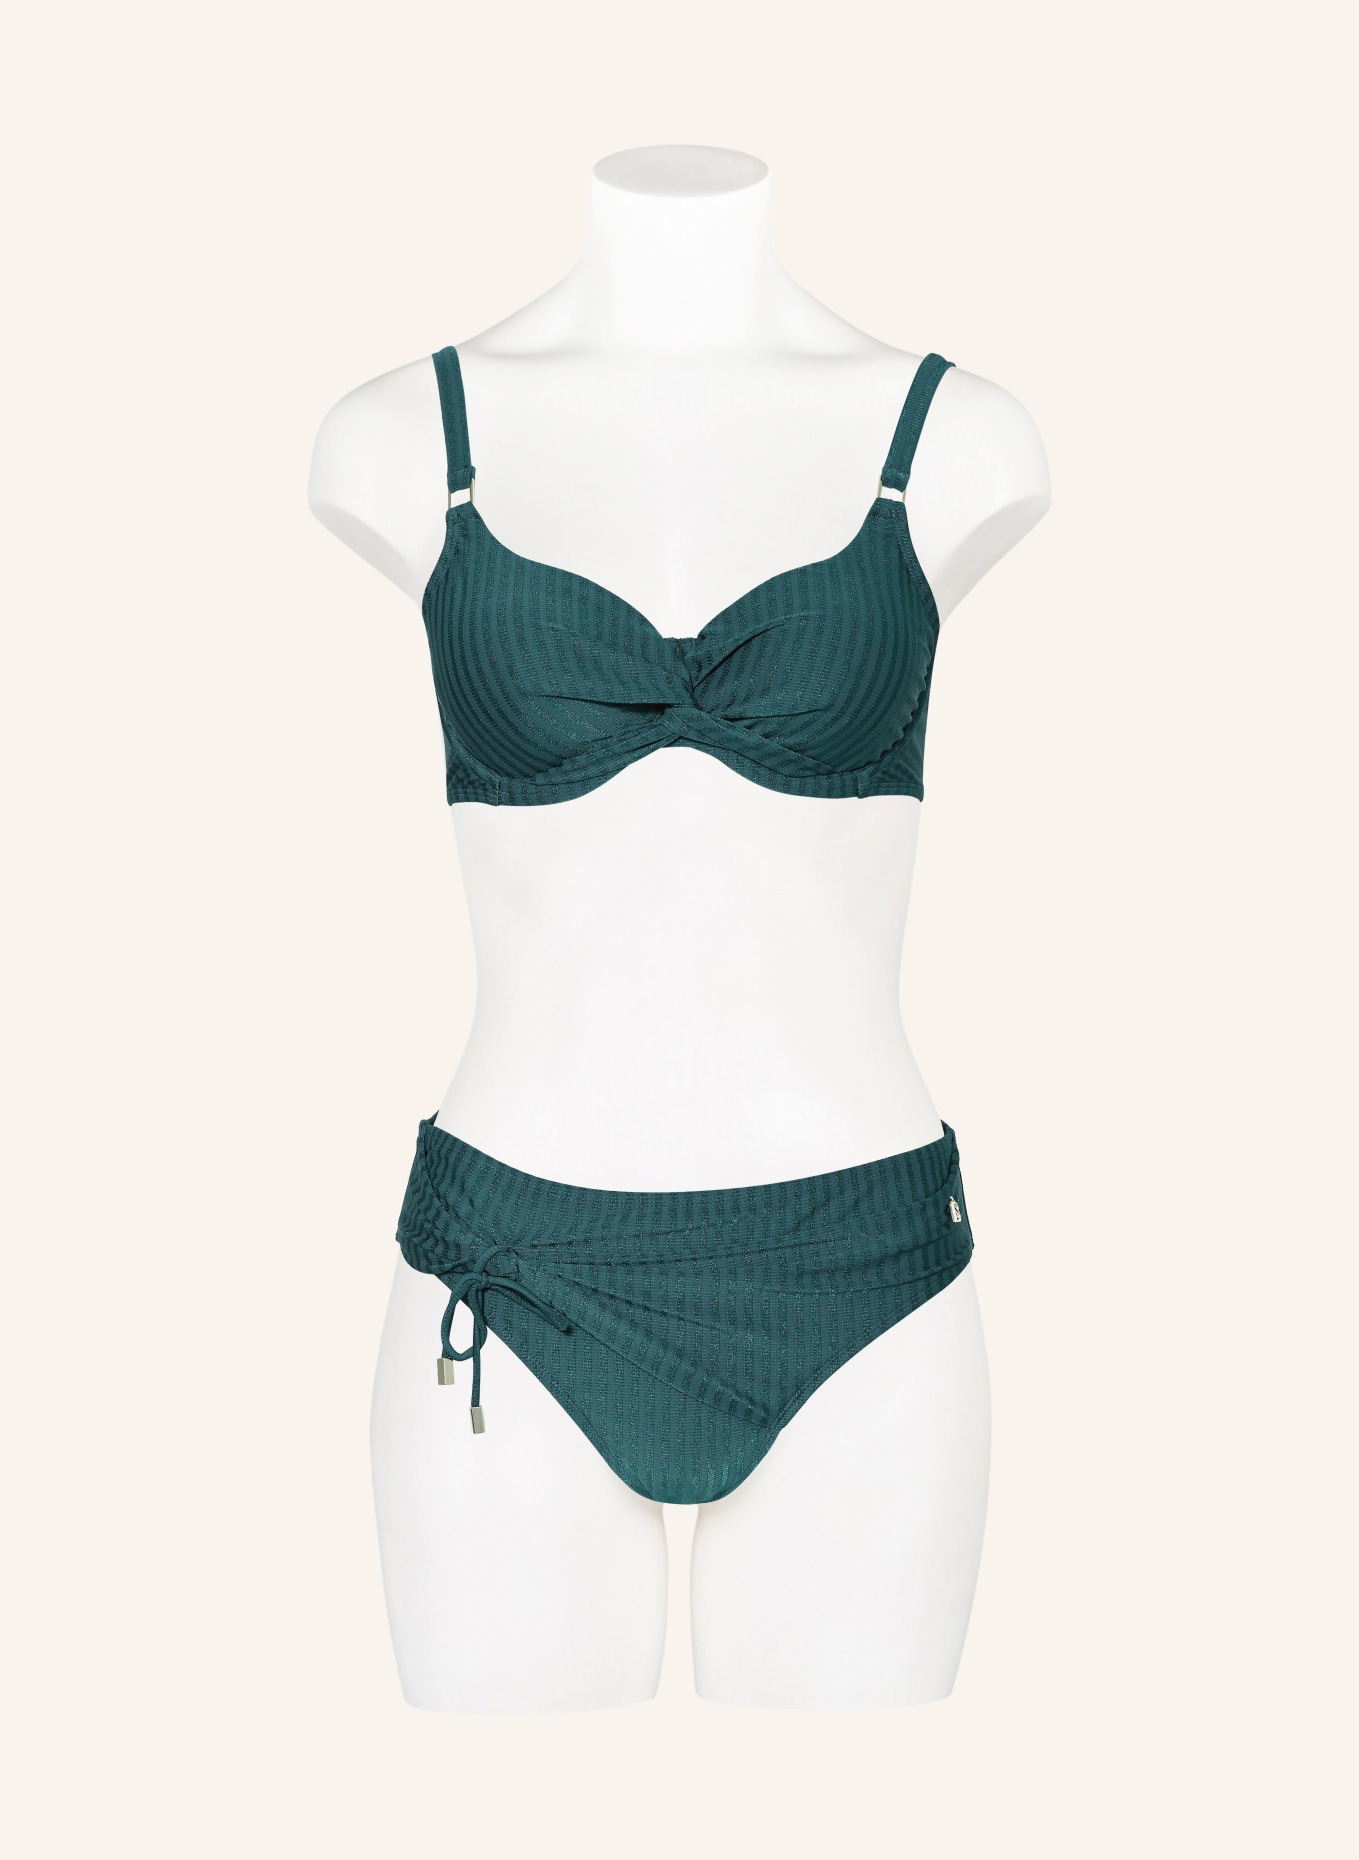 BEACHLIFE Underwired bikini top REFLECTING POND, Color: TEAL (Image 2)